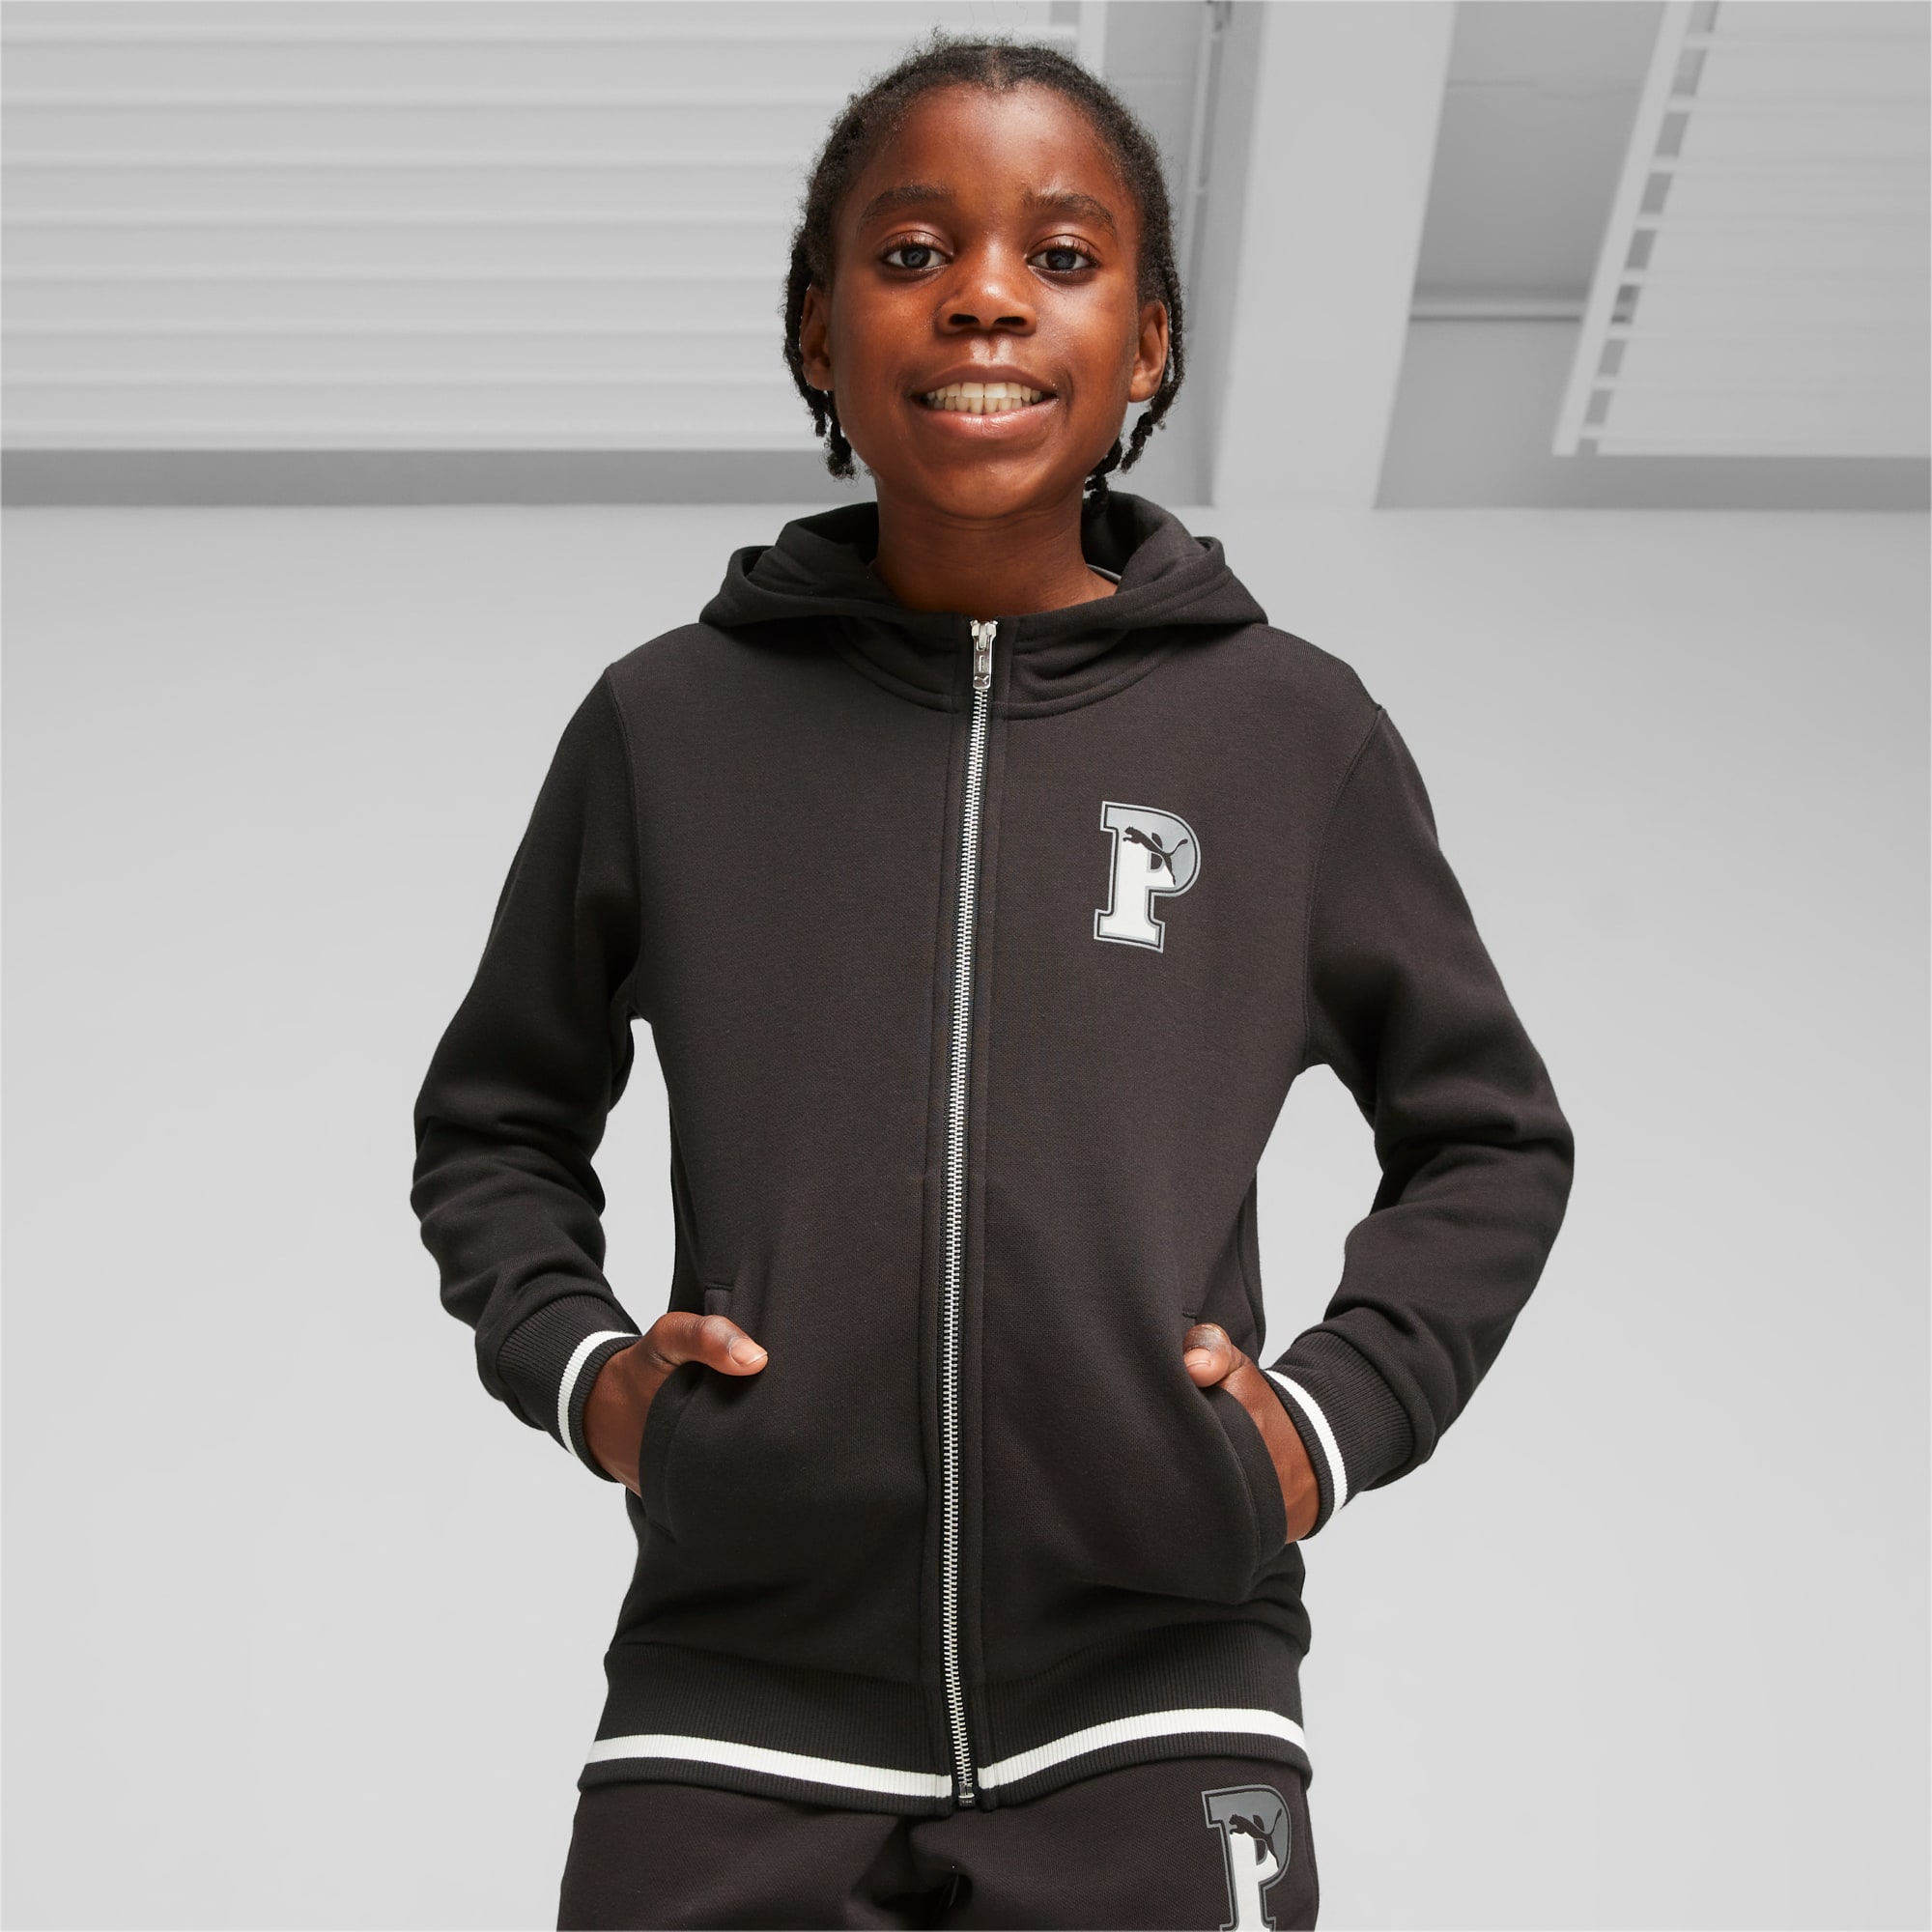 MILAN KIDS' TRACKSUIT WITH FULLY-ZIPPERED, HOODED SWEATSHIRT AND PANTS